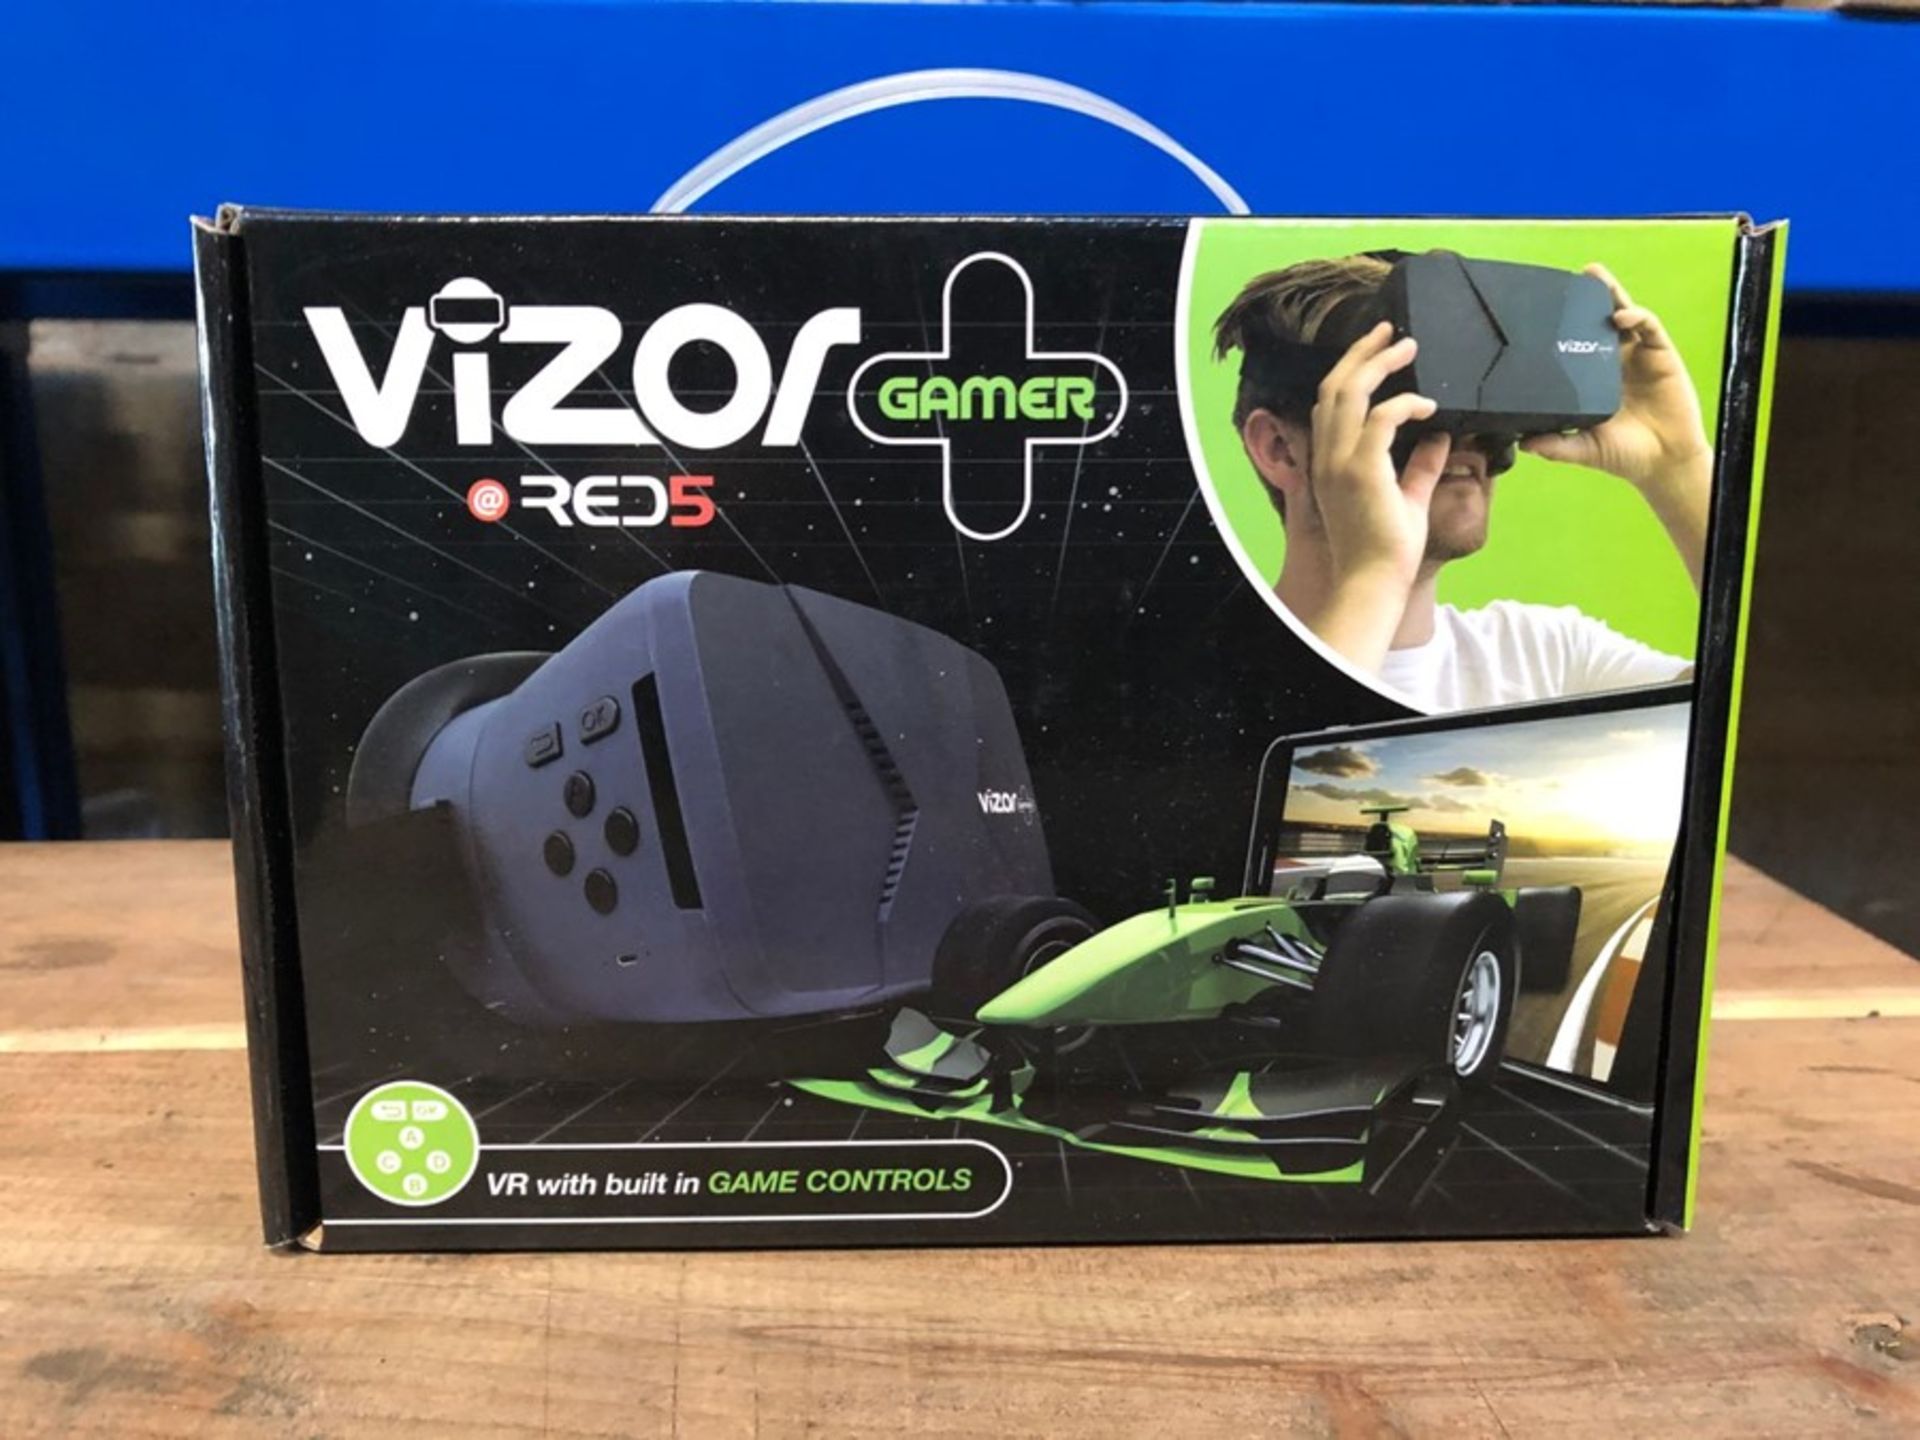 8 X VIZOR GAMING VR HEADSETS / COMBINED RRP £120.00 / UNTESTED CUSTOMER RETURNS